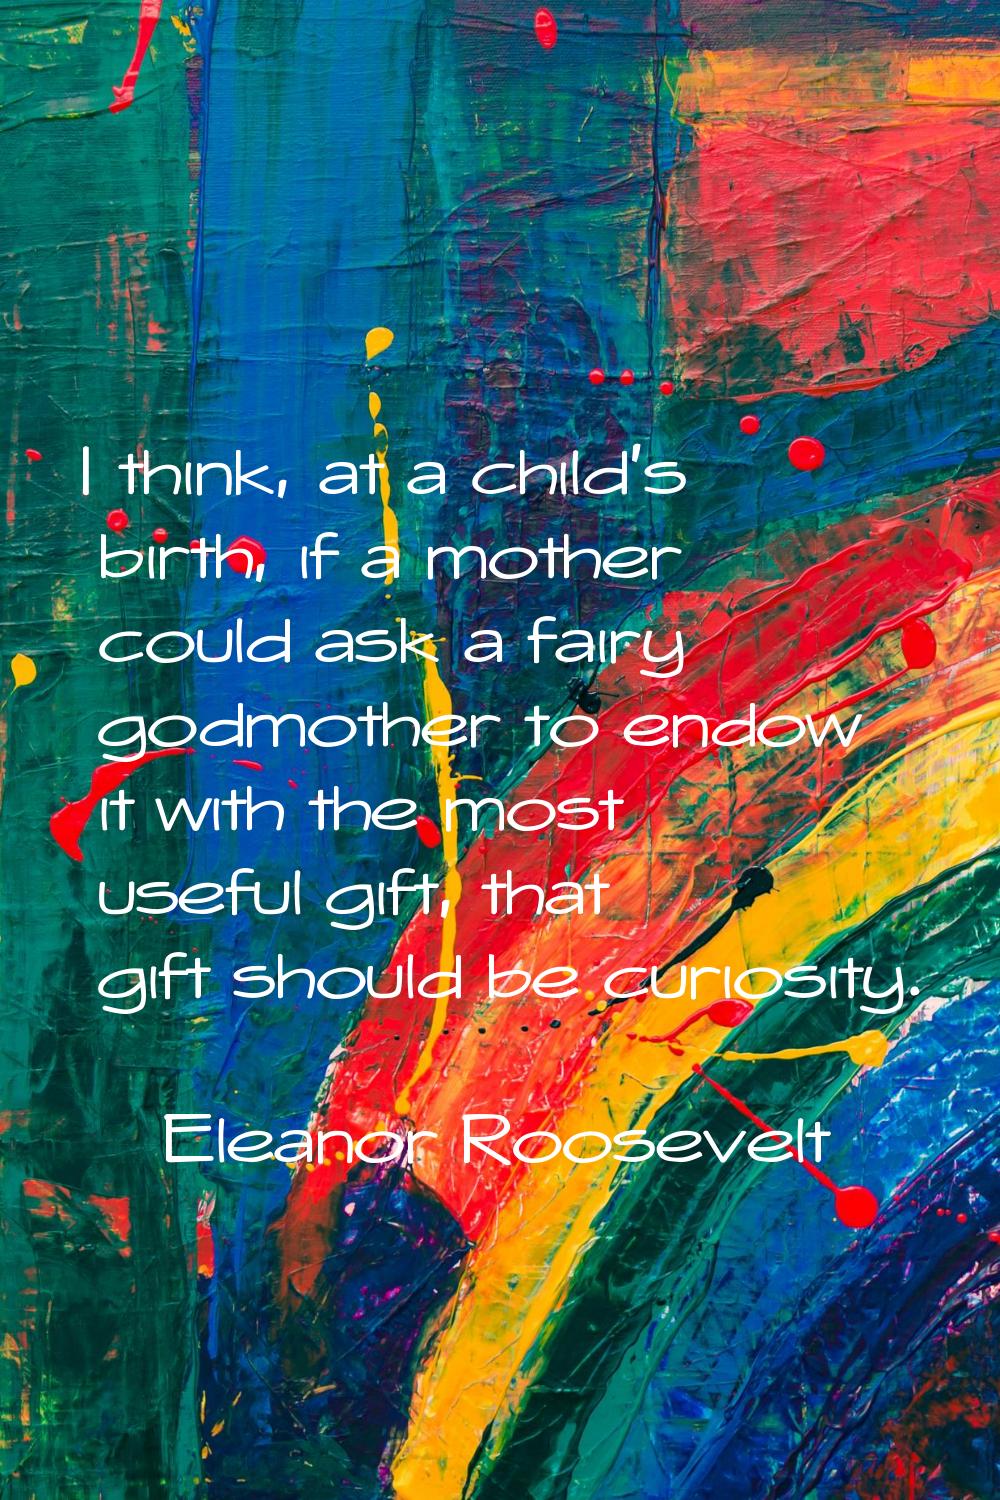 I think, at a child's birth, if a mother could ask a fairy godmother to endow it with the most usef